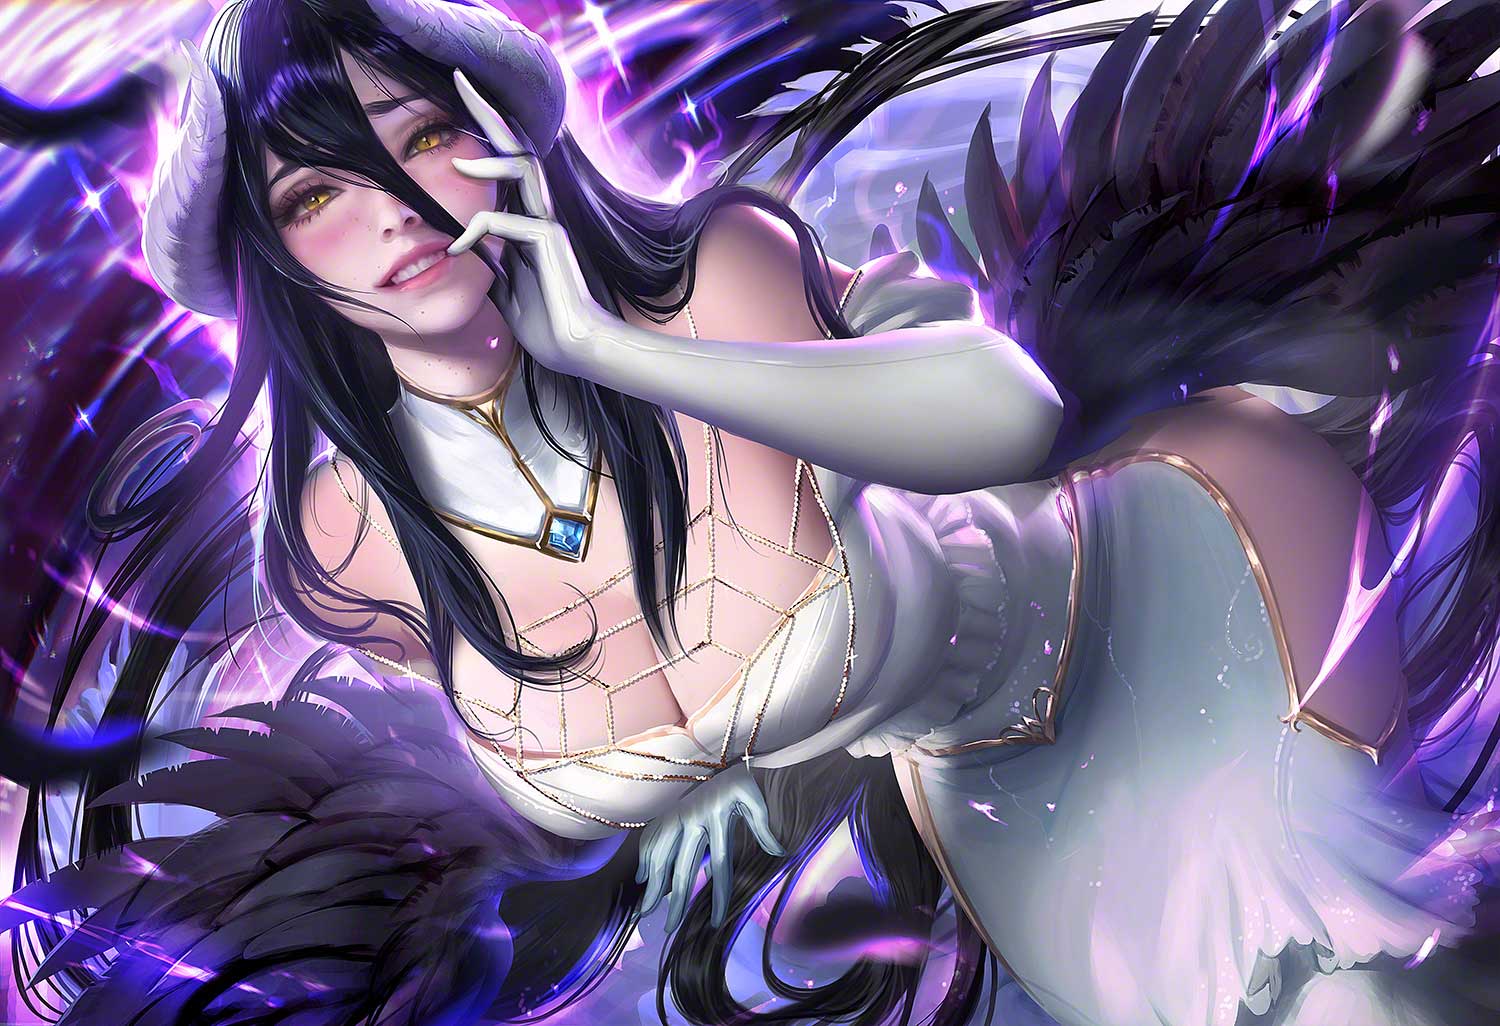 Overlord Albedo Wallpaper Engine Free. Download Wallpaper Engine Wallpaper FREE